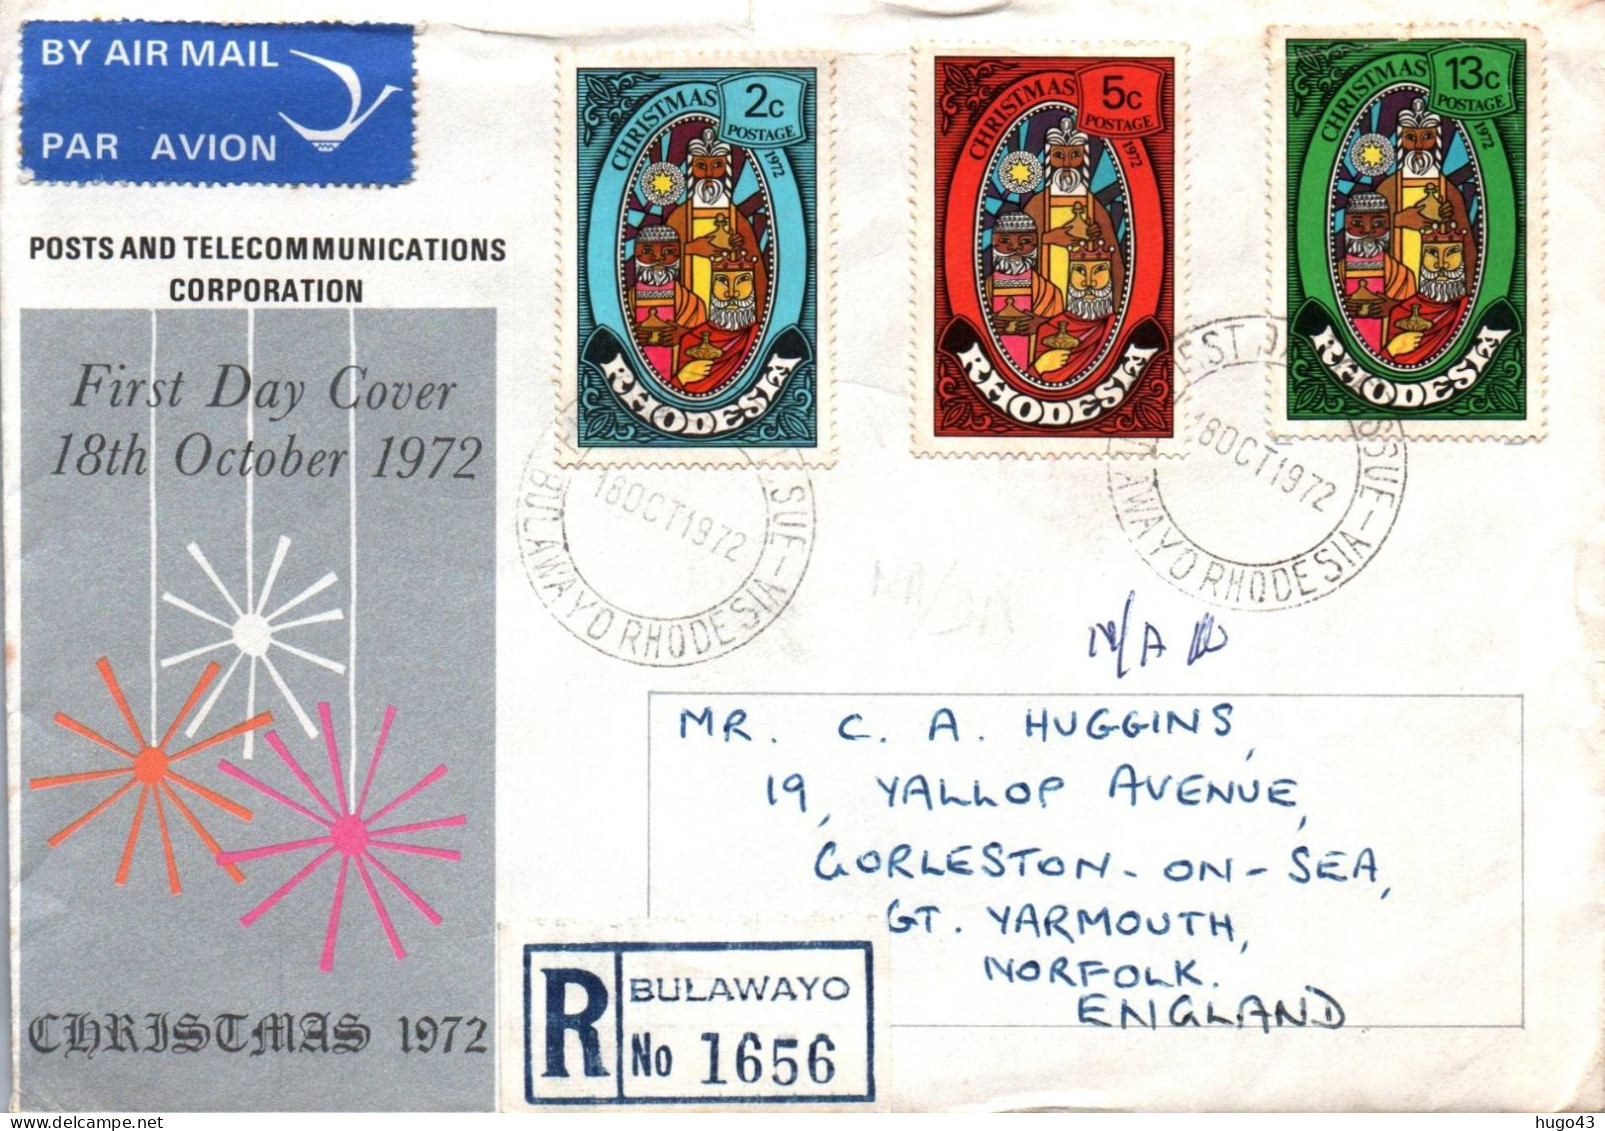 1972 - CHRISTMAS 1972 - FIRST DAY COVER  - RECOMMANDEE BULAWAYO TO ENGLAND - Rhodesia (1964-1980)